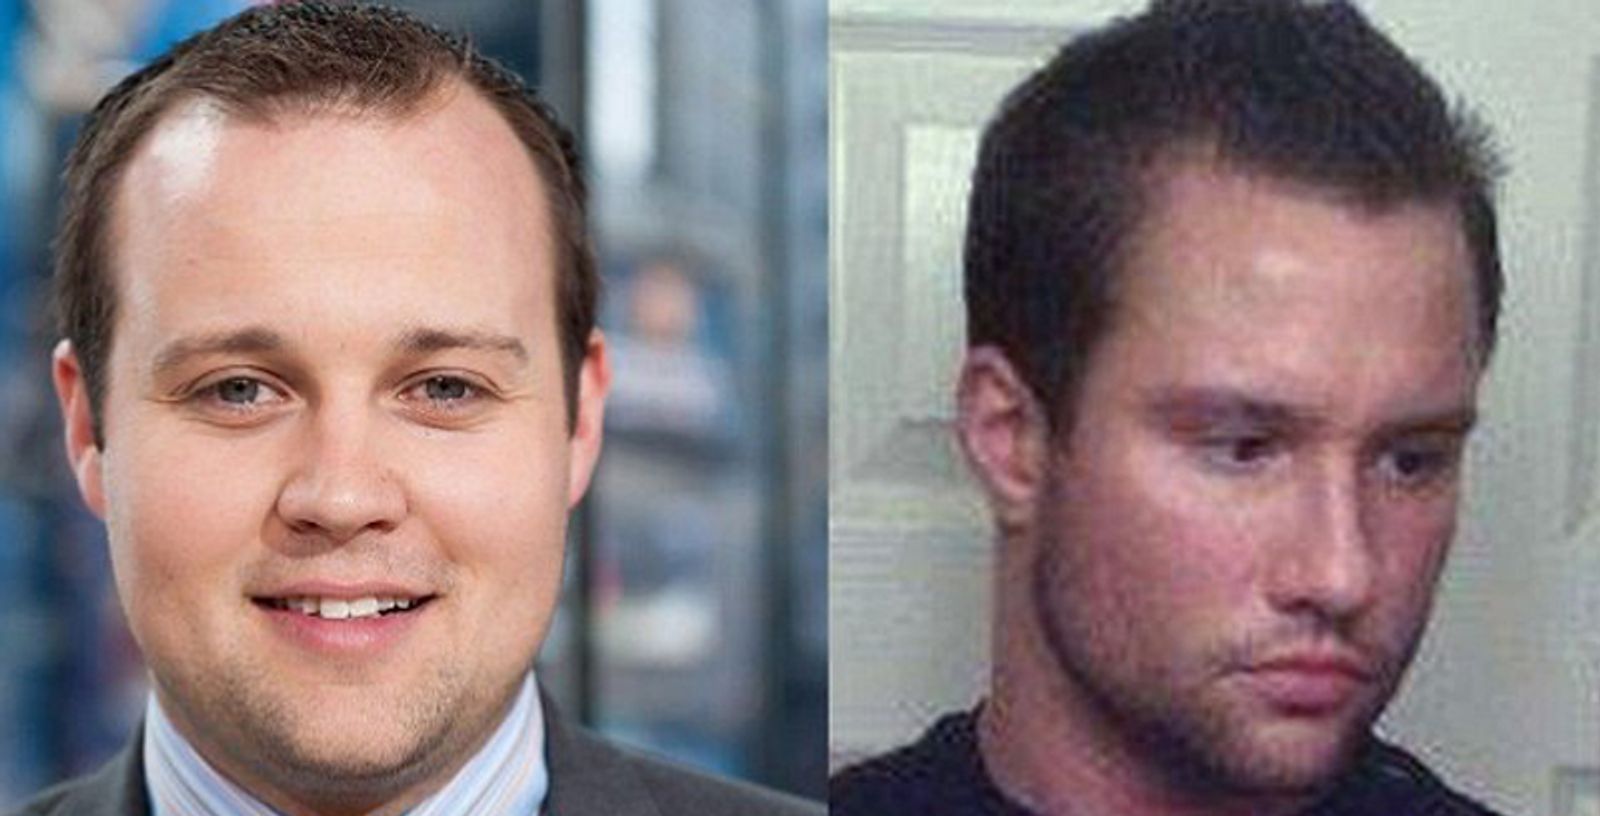 More Ashley Madison Legal Woes For Josh Duggar